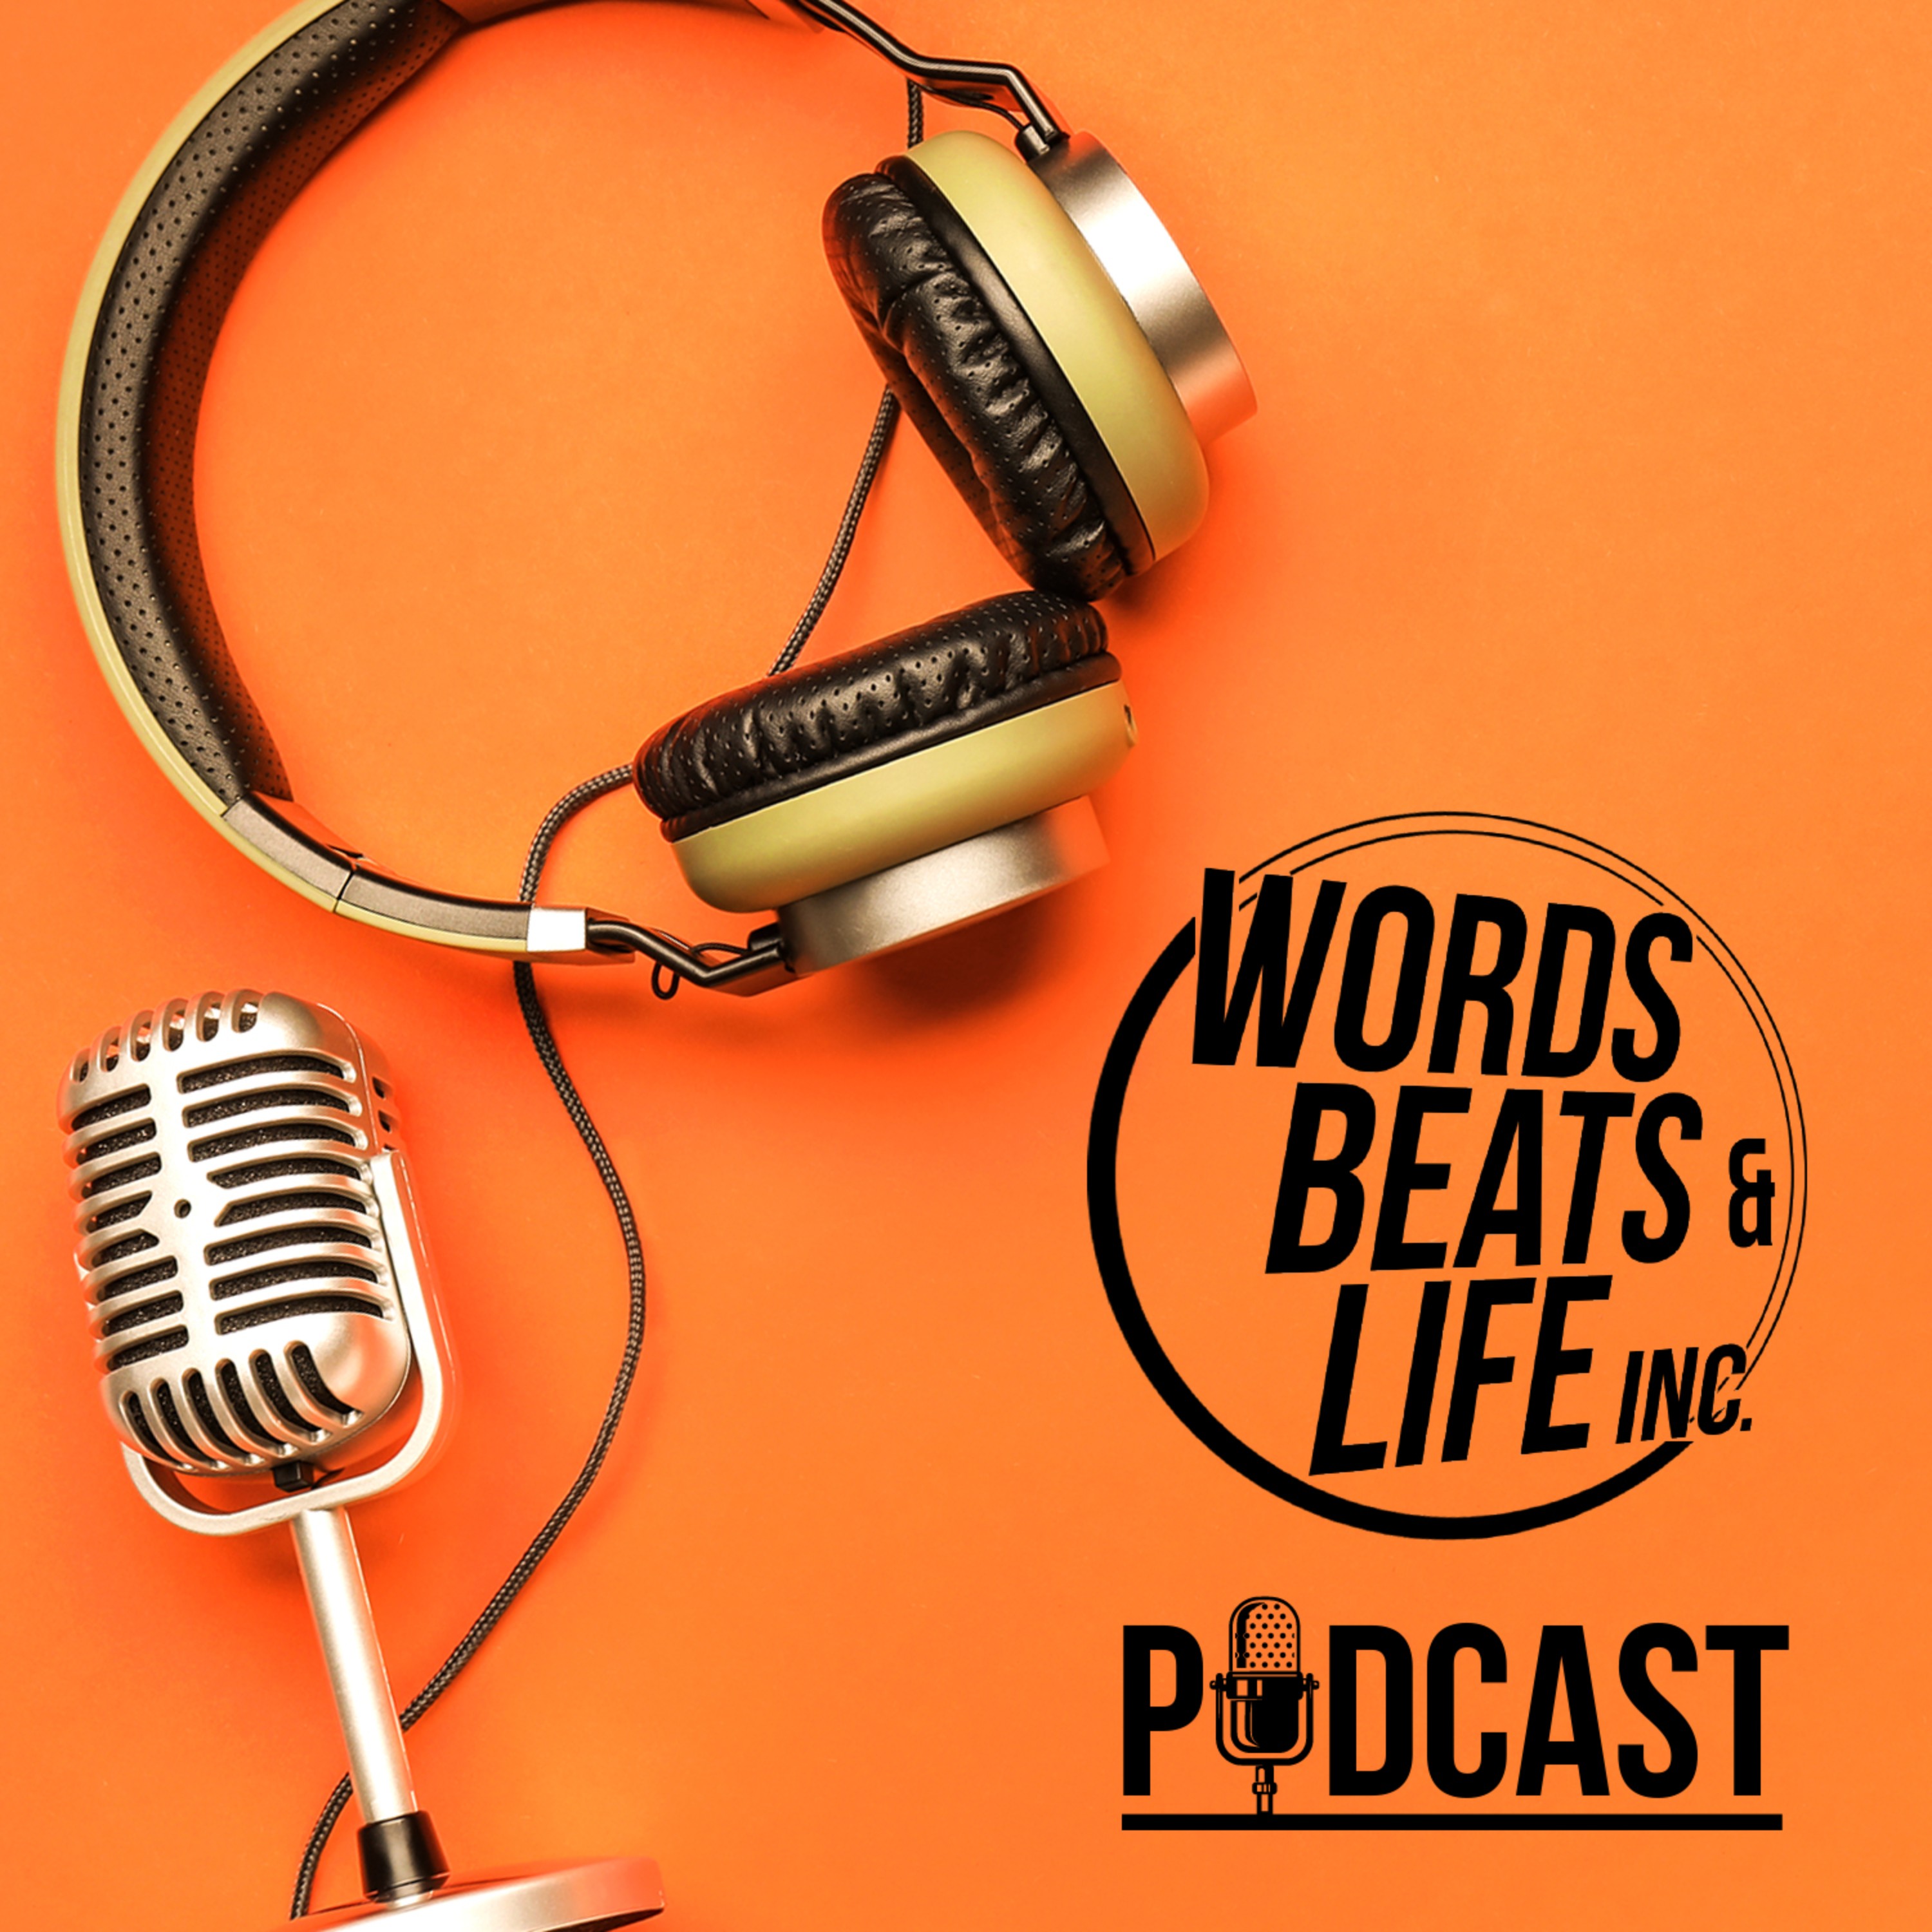 Words Beats & Life Podcasts